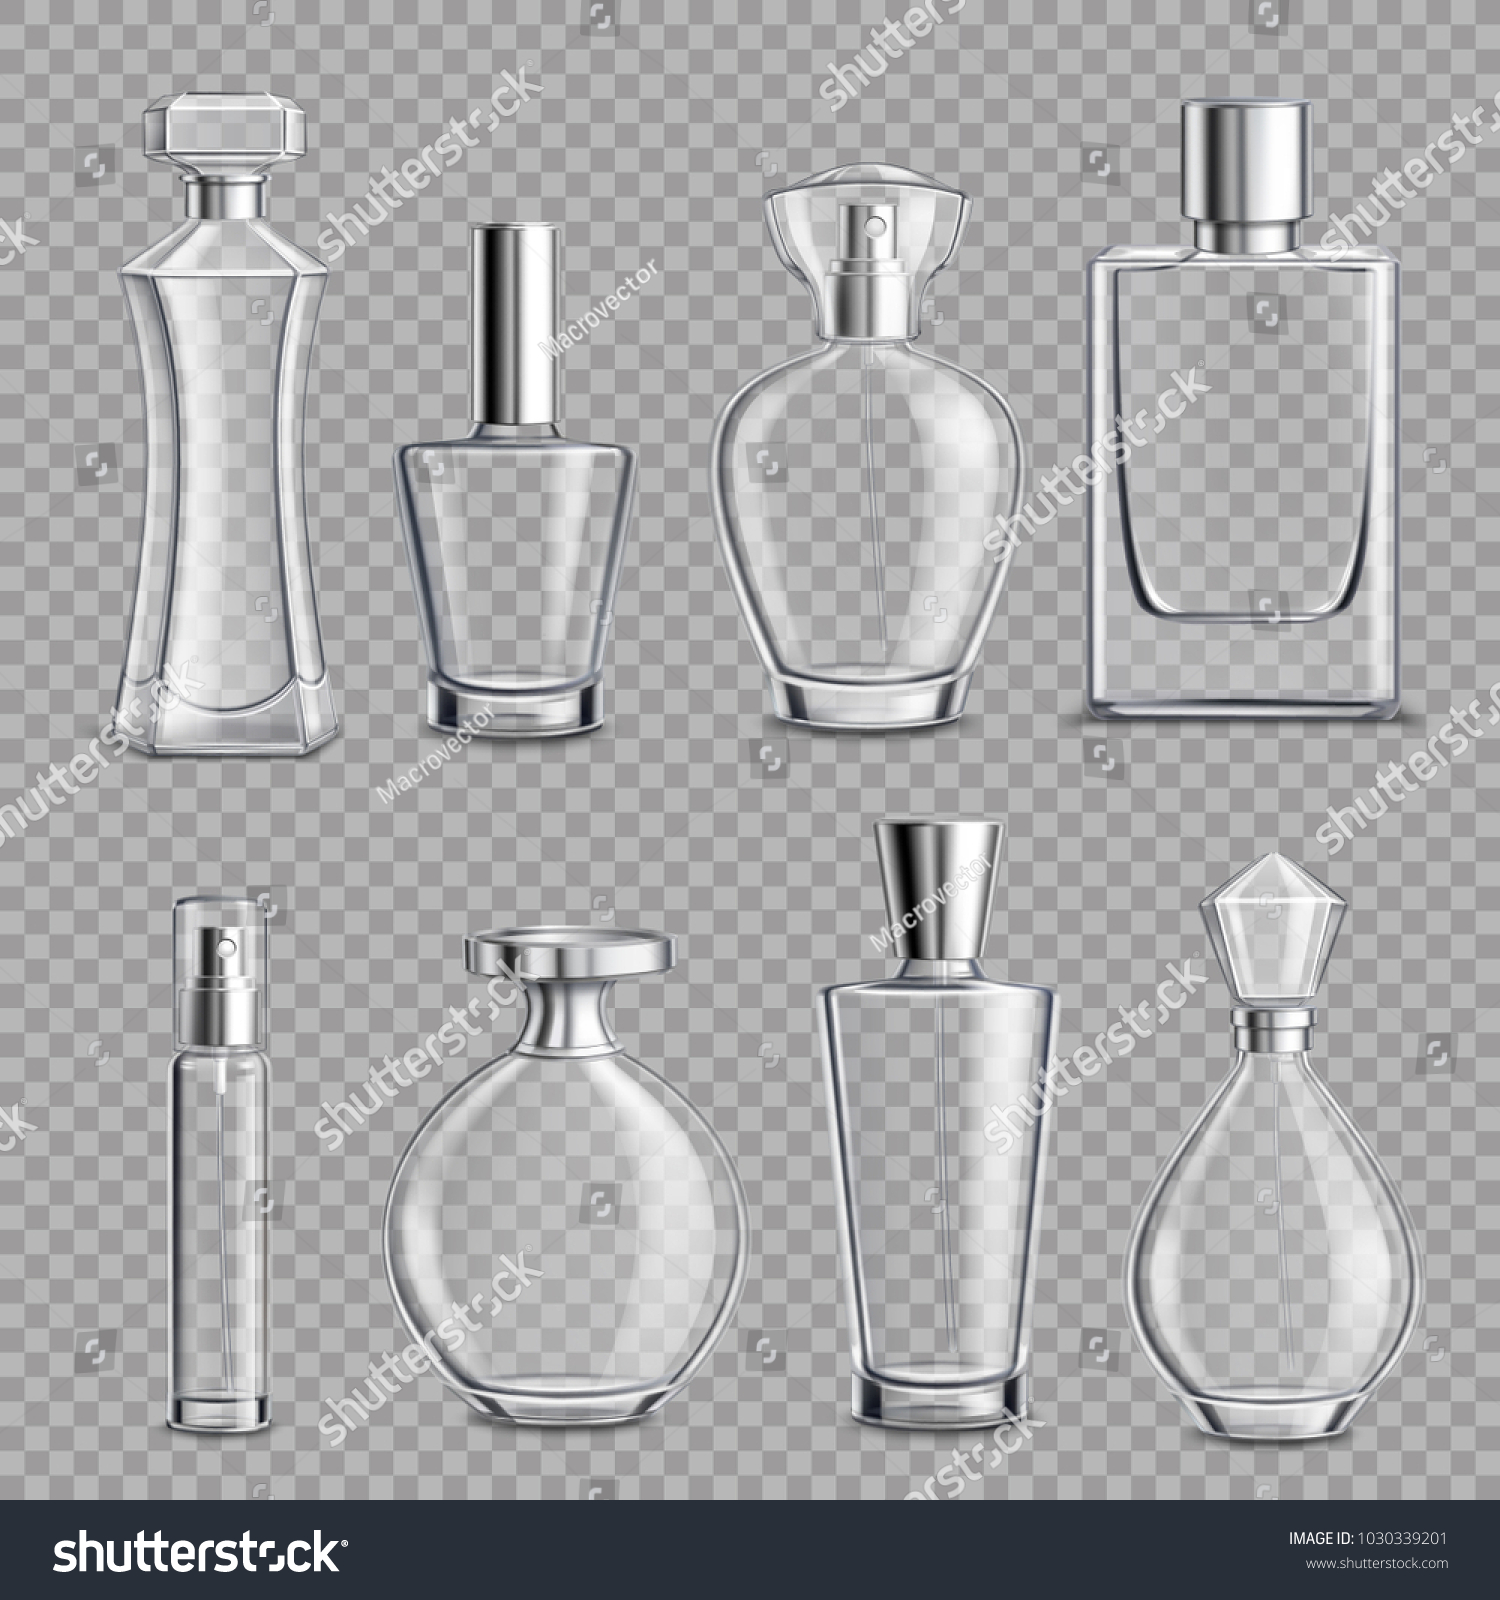 SVG of Perfume glass bottles various shapes and caps clear colorless realistic set on transparent background isolated vector illustration svg